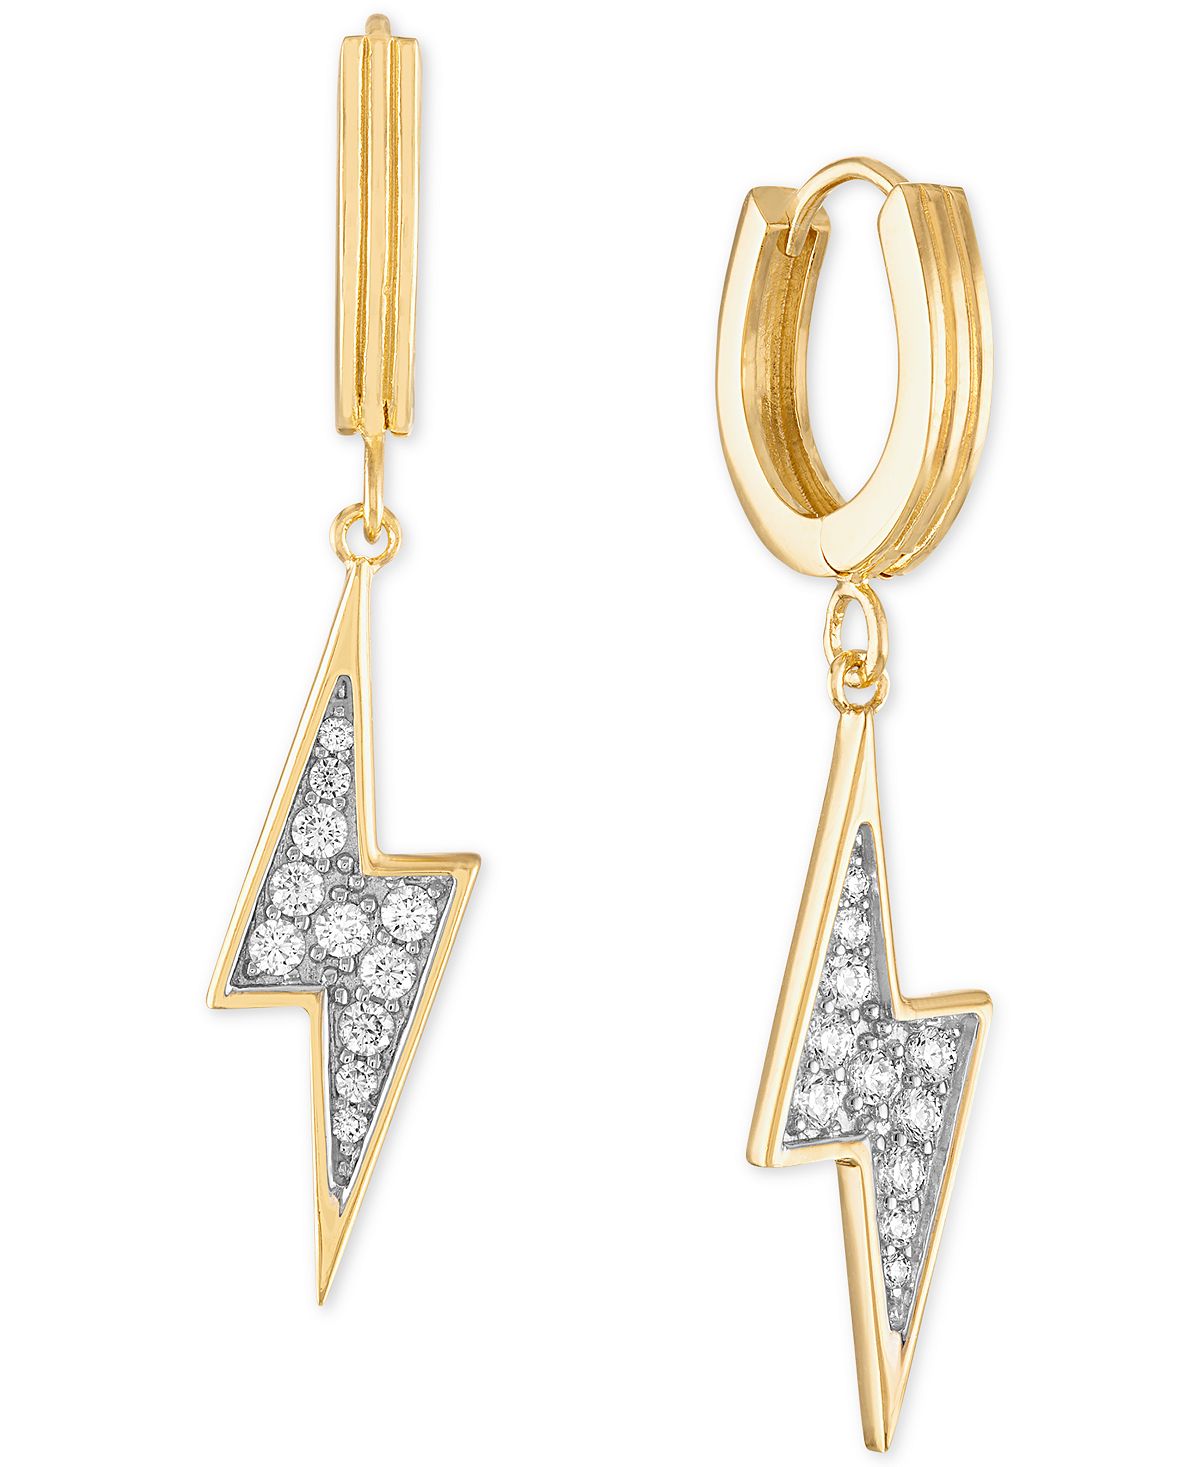 Esquire Men's Jewelry - Cubic Zirconia Lightning Bolt Drop Earrings in 14k Gold Plated Sterling Silver